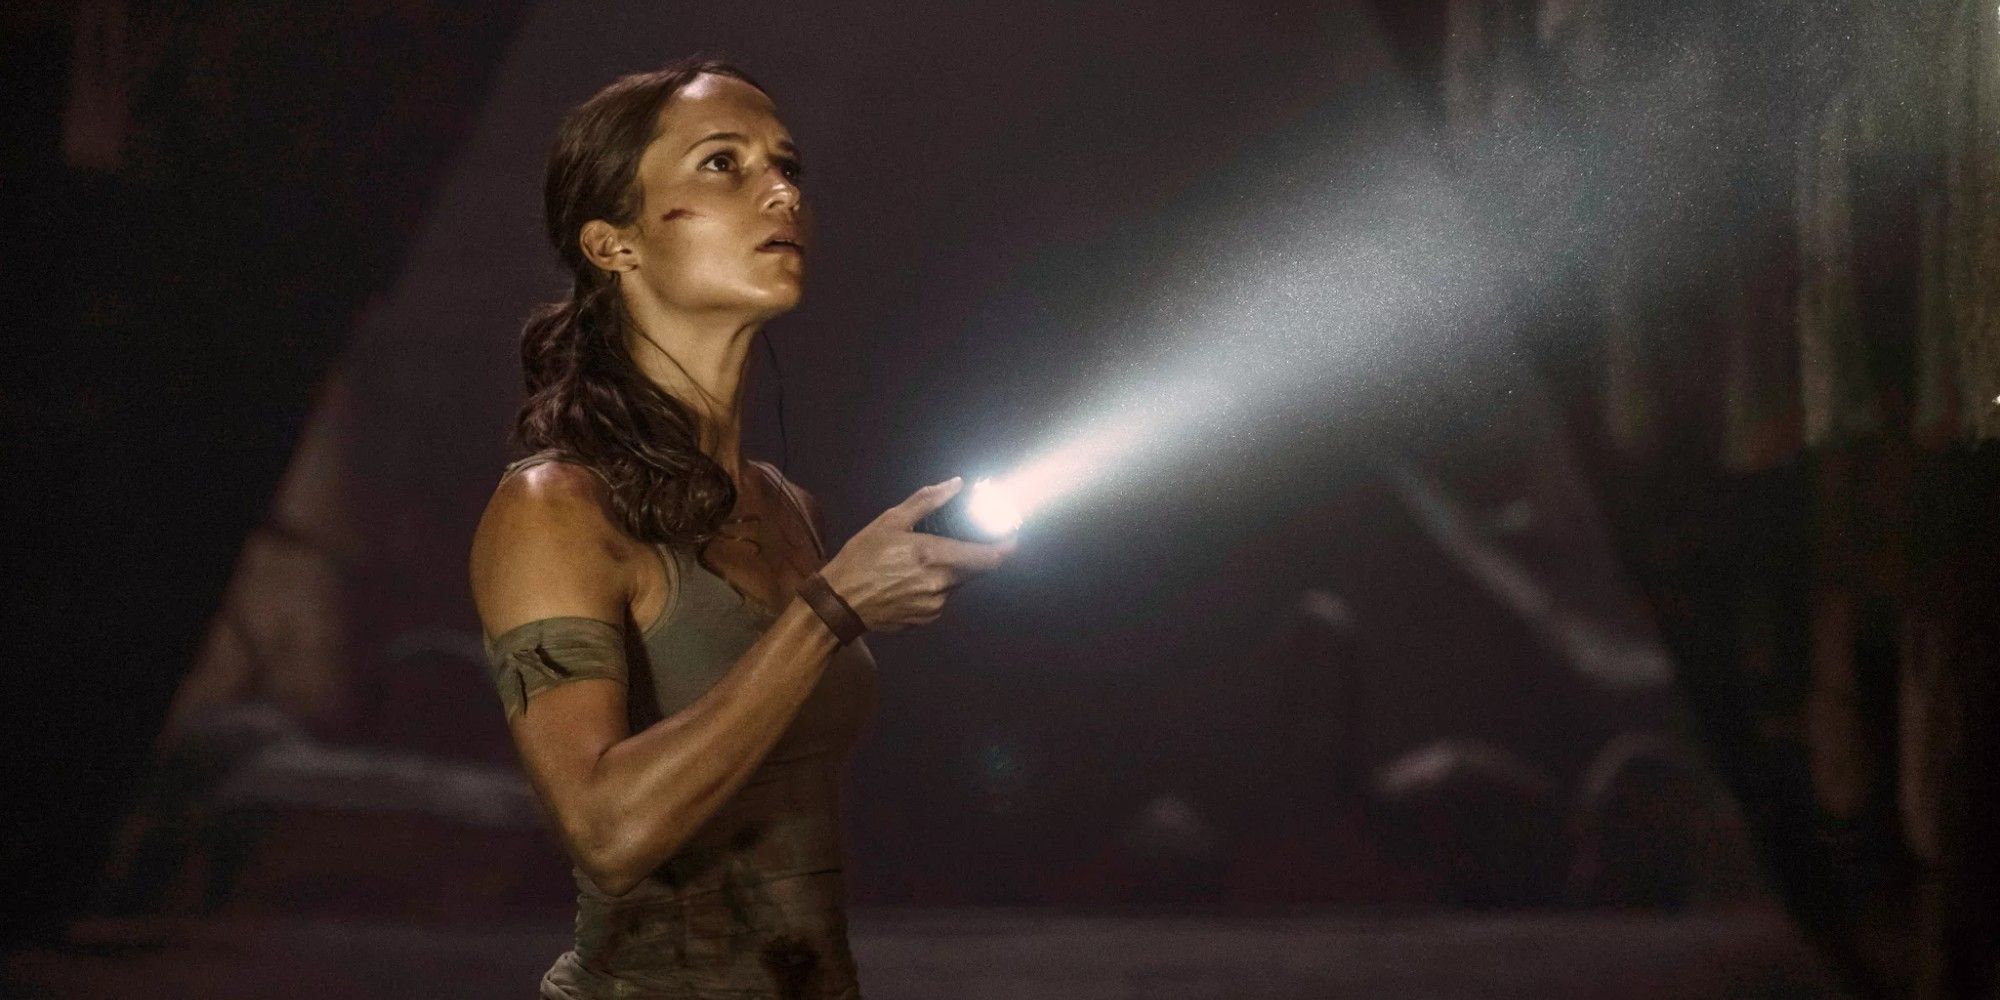 The Tomb Raider Movie Sequel Is Reportedly Cancelled, Reboot Already Planned